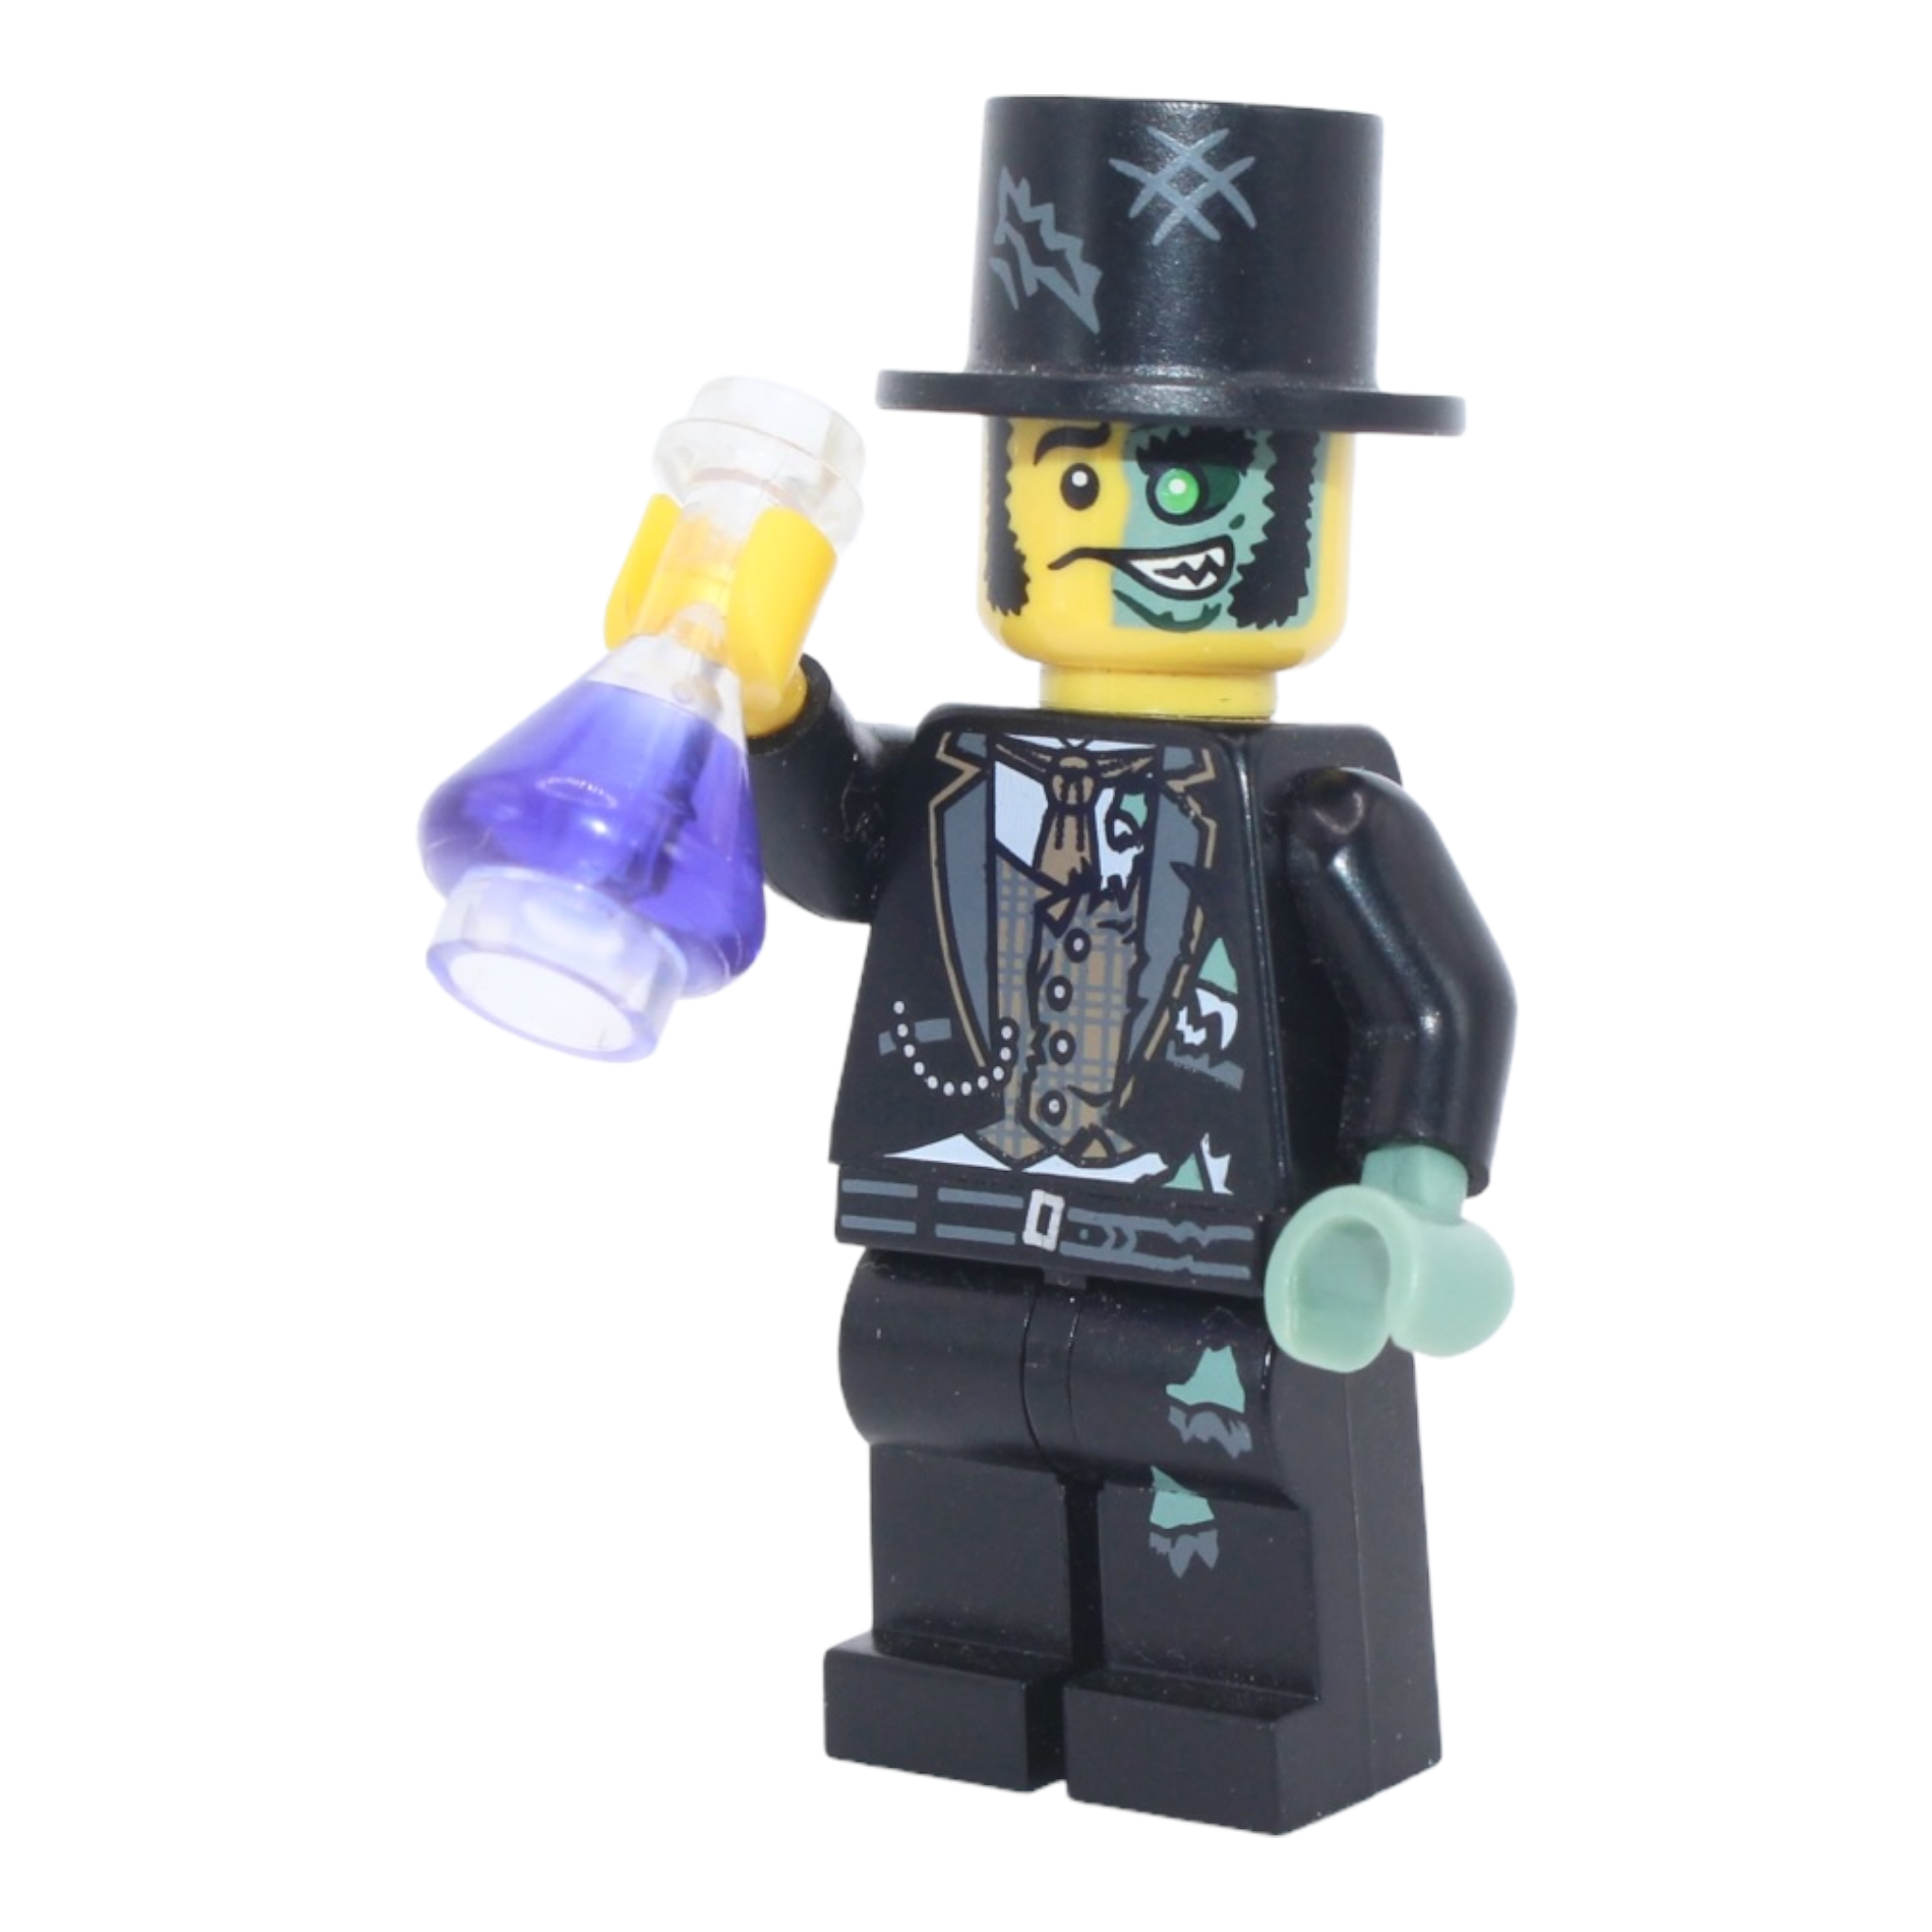 LEGO Series 9: Mr. Good and Evil